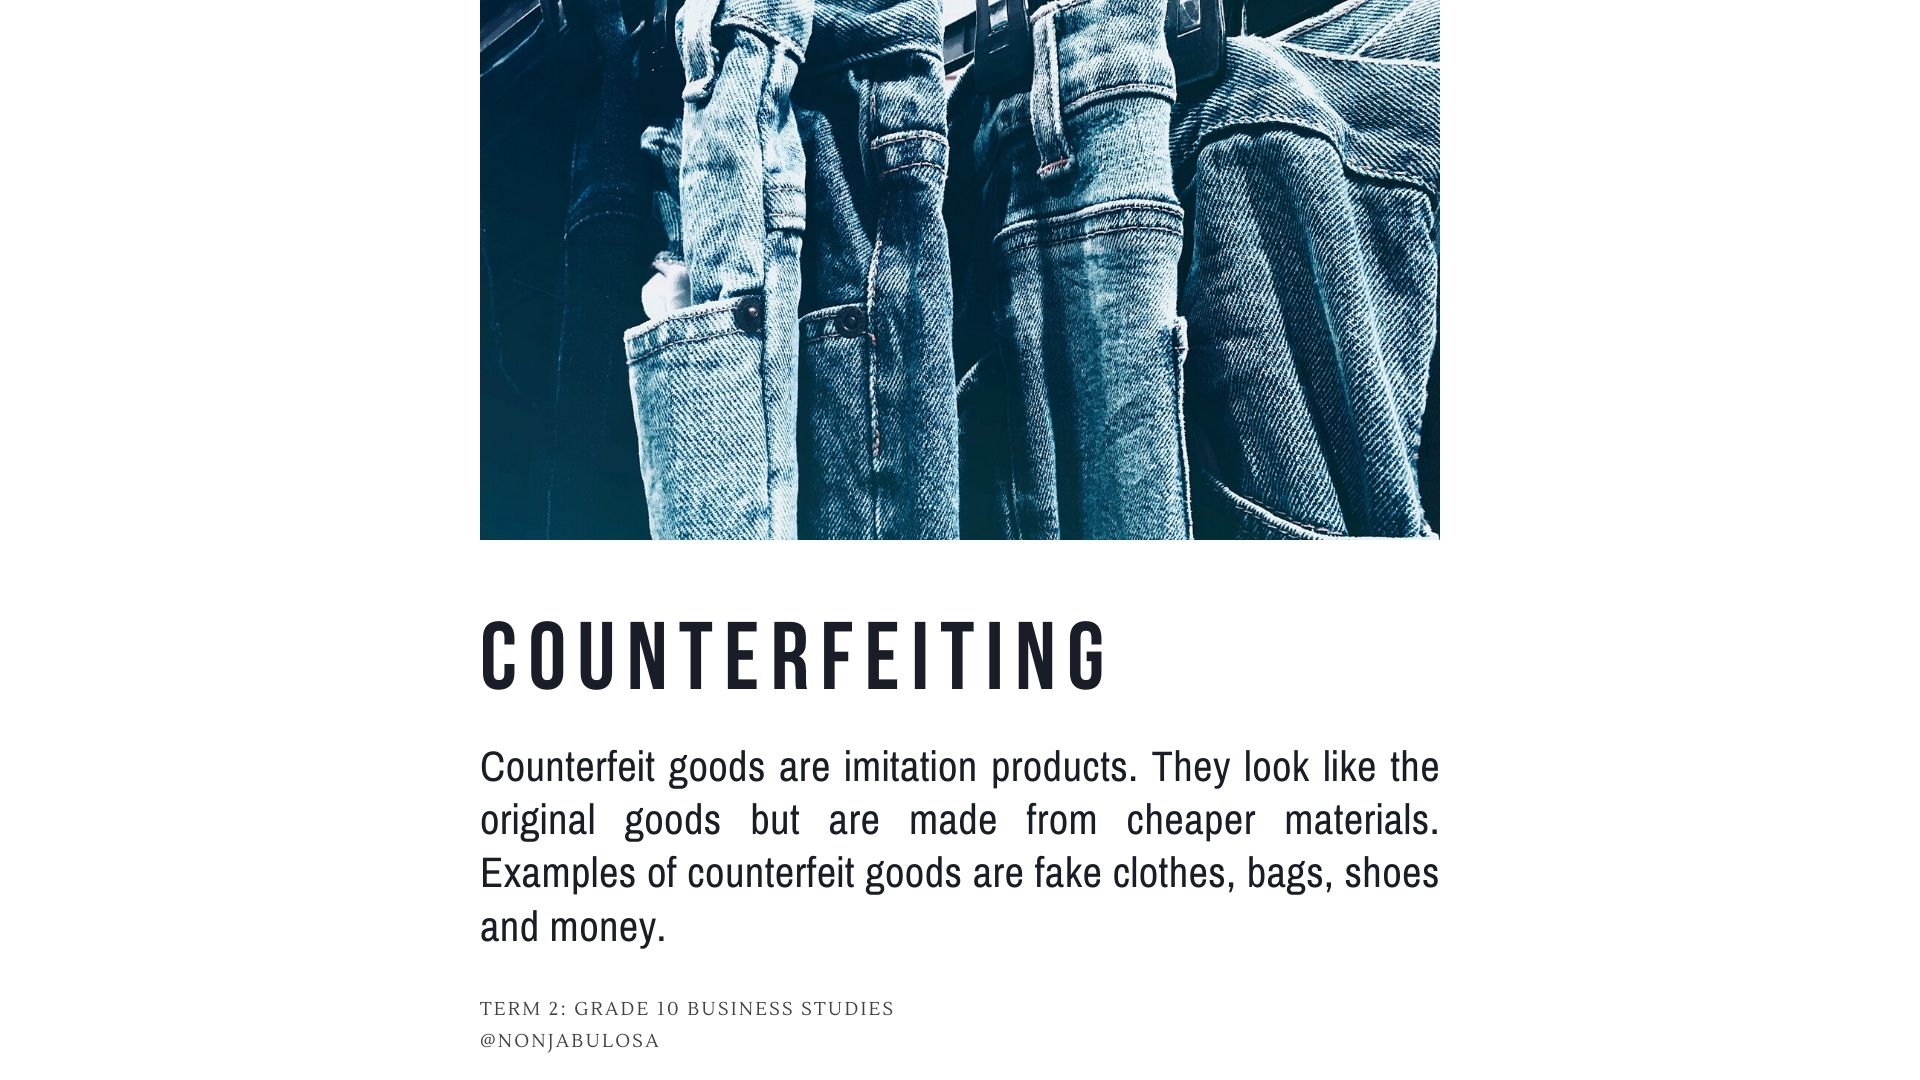 List of South African Contemporary Socio-Economic Issues - Definition and explanation of counterfeiting